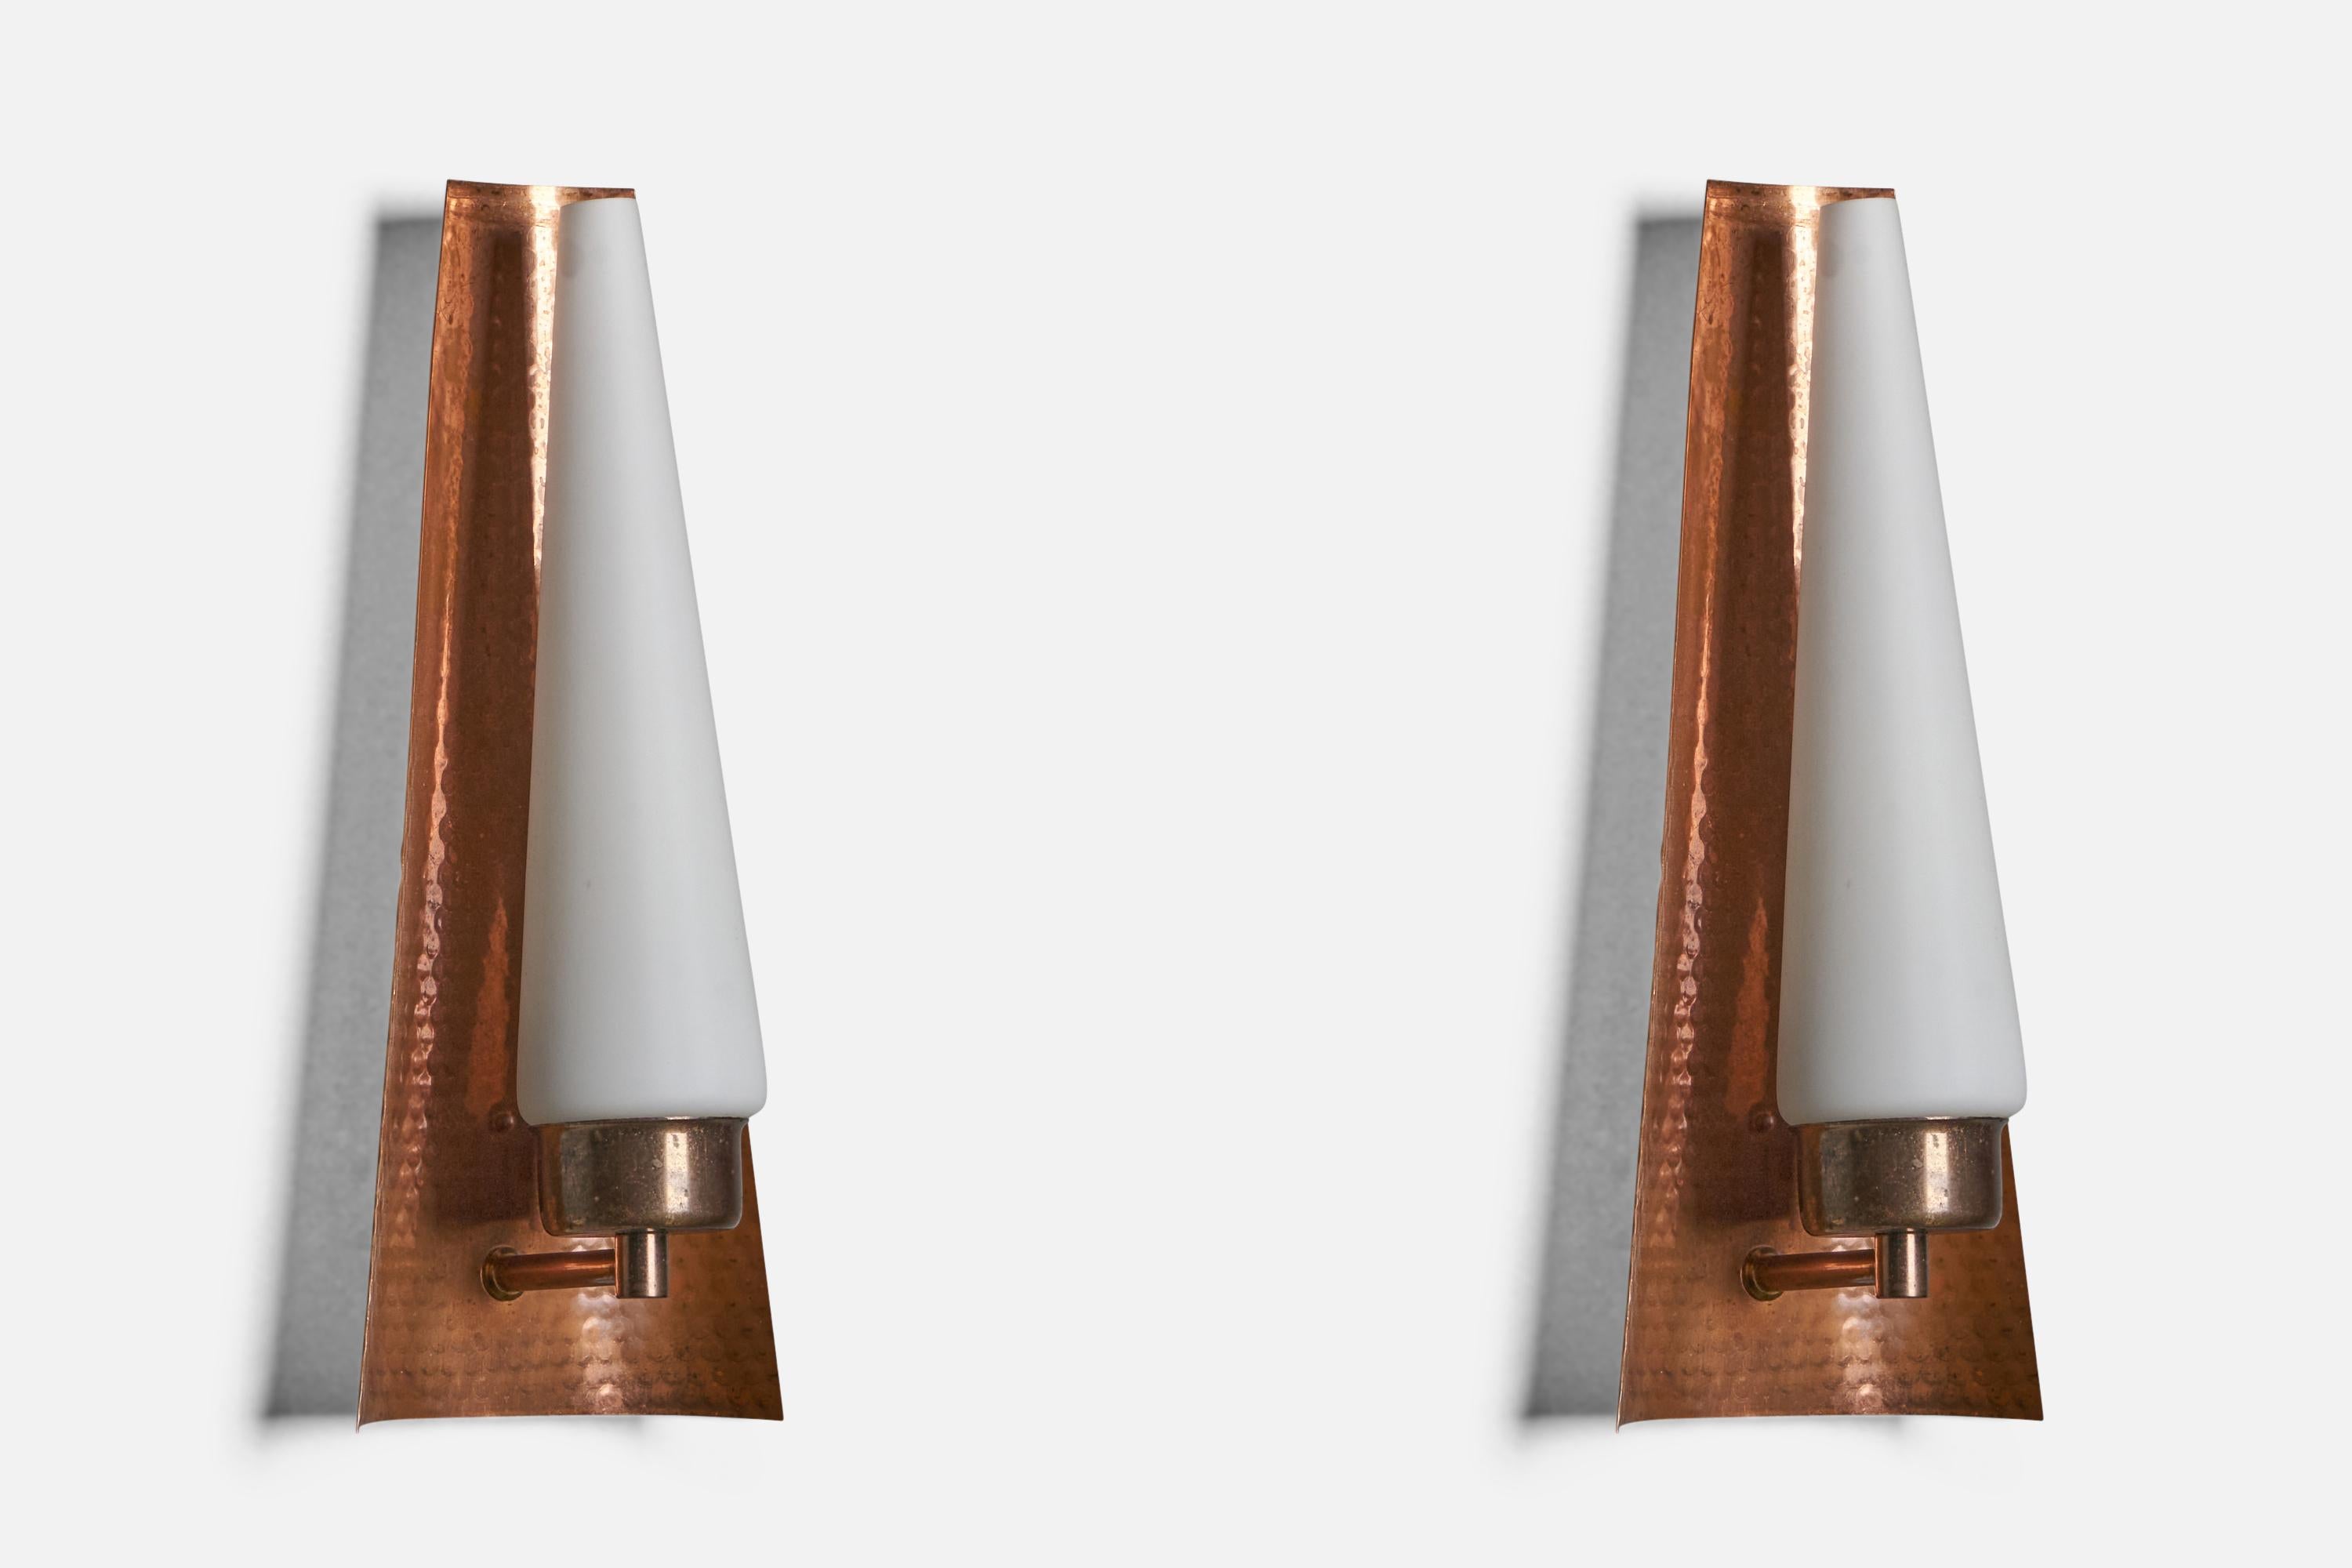 A pair of copper and opaline glass wall lights, designed and produced in Sweden, c. 1950s

Overall Dimensions (inches): 12.75